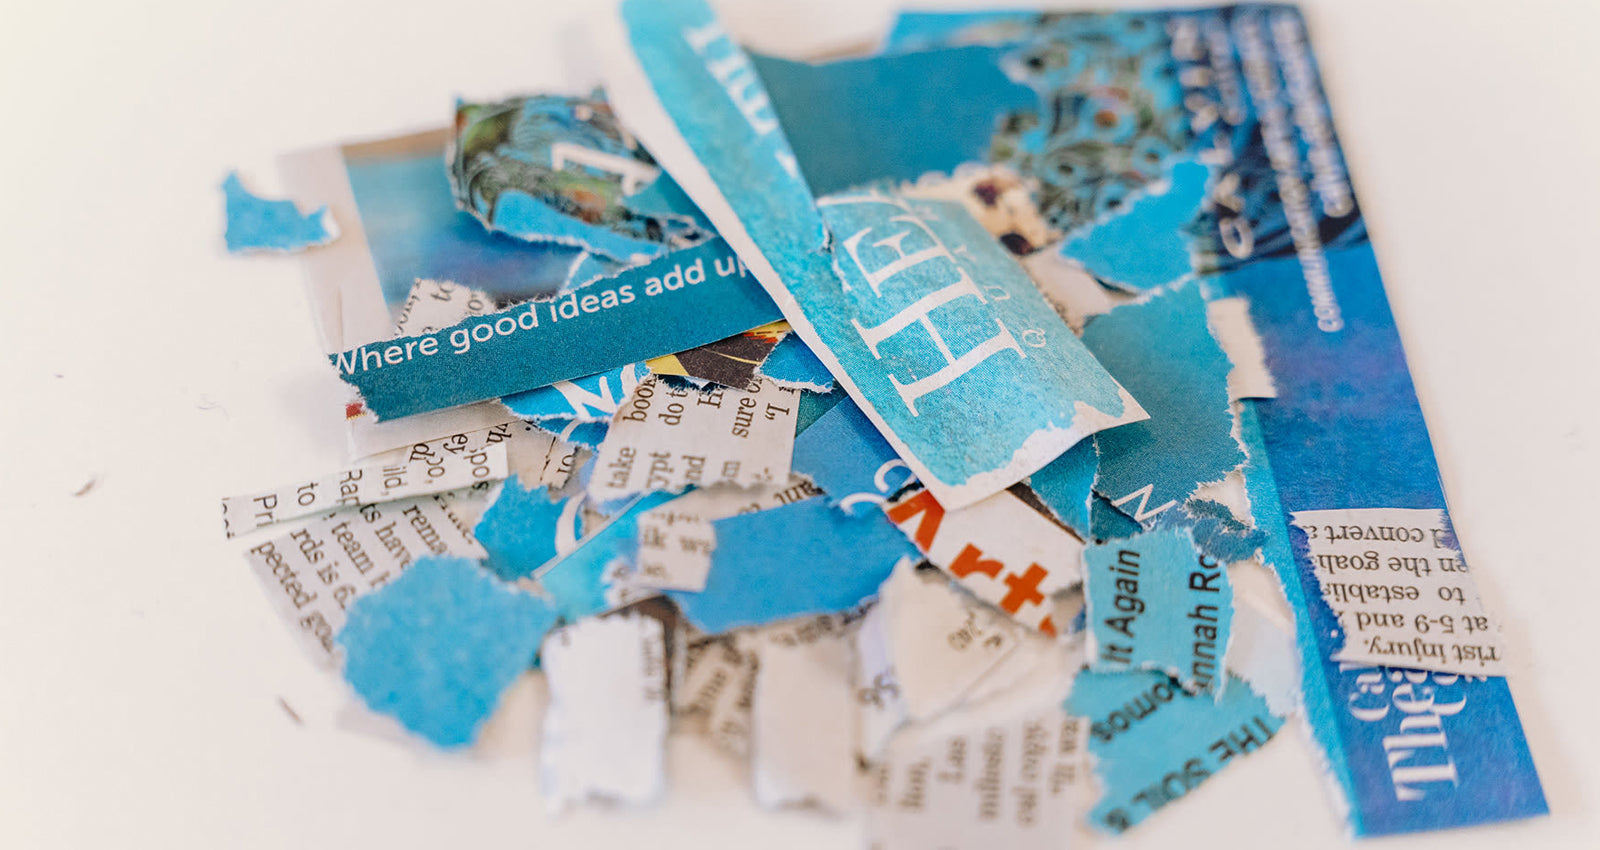 Small bits of various blue-colored newspaper are gently piled on a clean studio table.